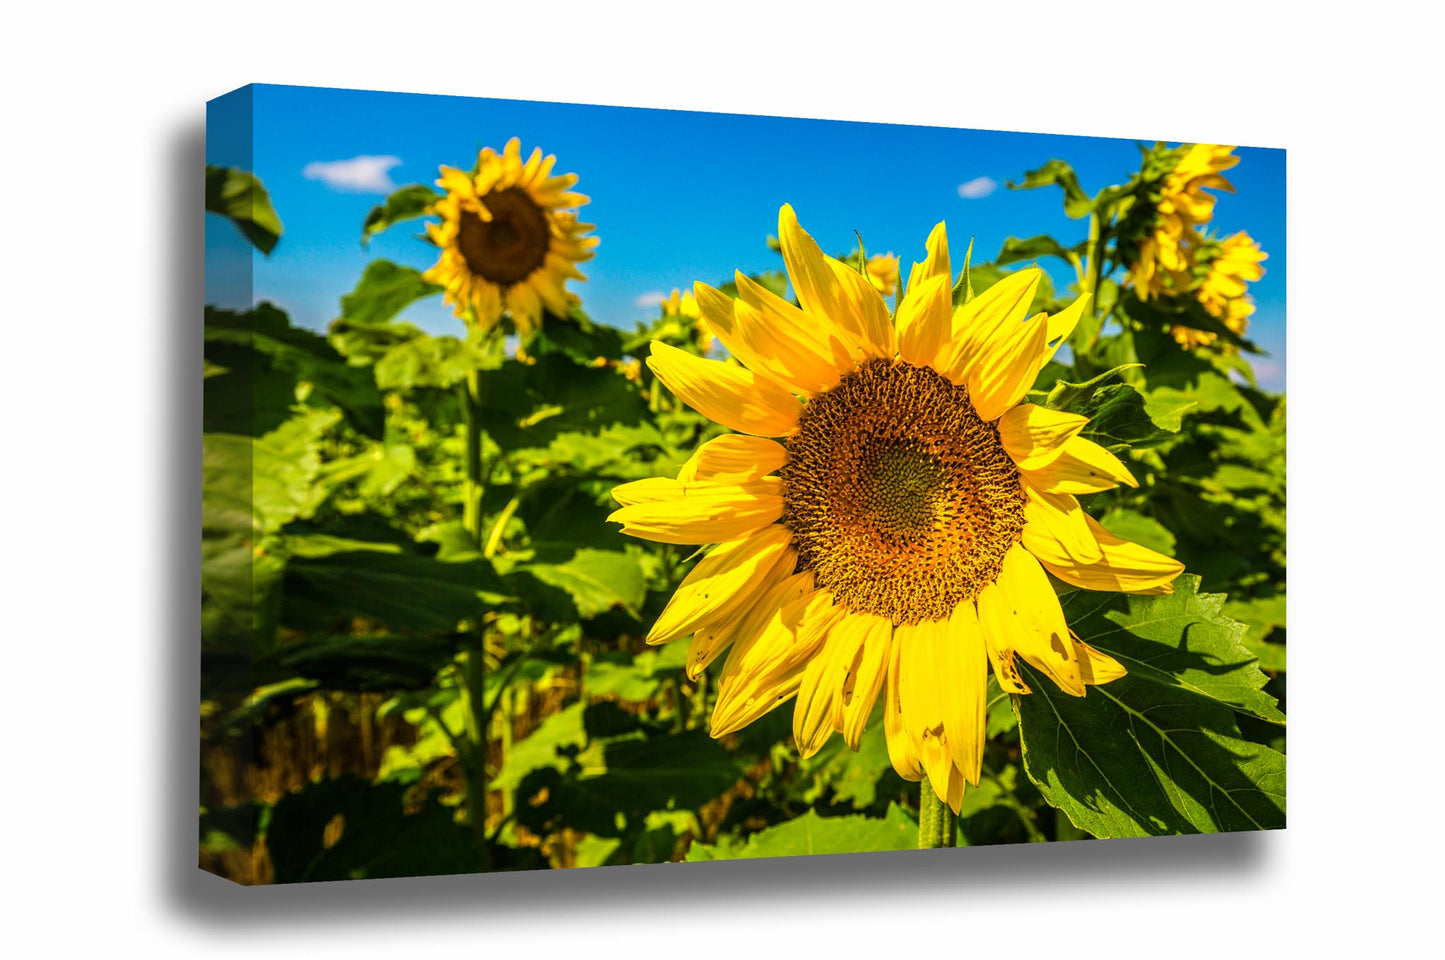 Canvas wall art of a large sunflower shining in sunlight on an autumn day in Kansas by Sean Ramsey of Southern Plains Photography.